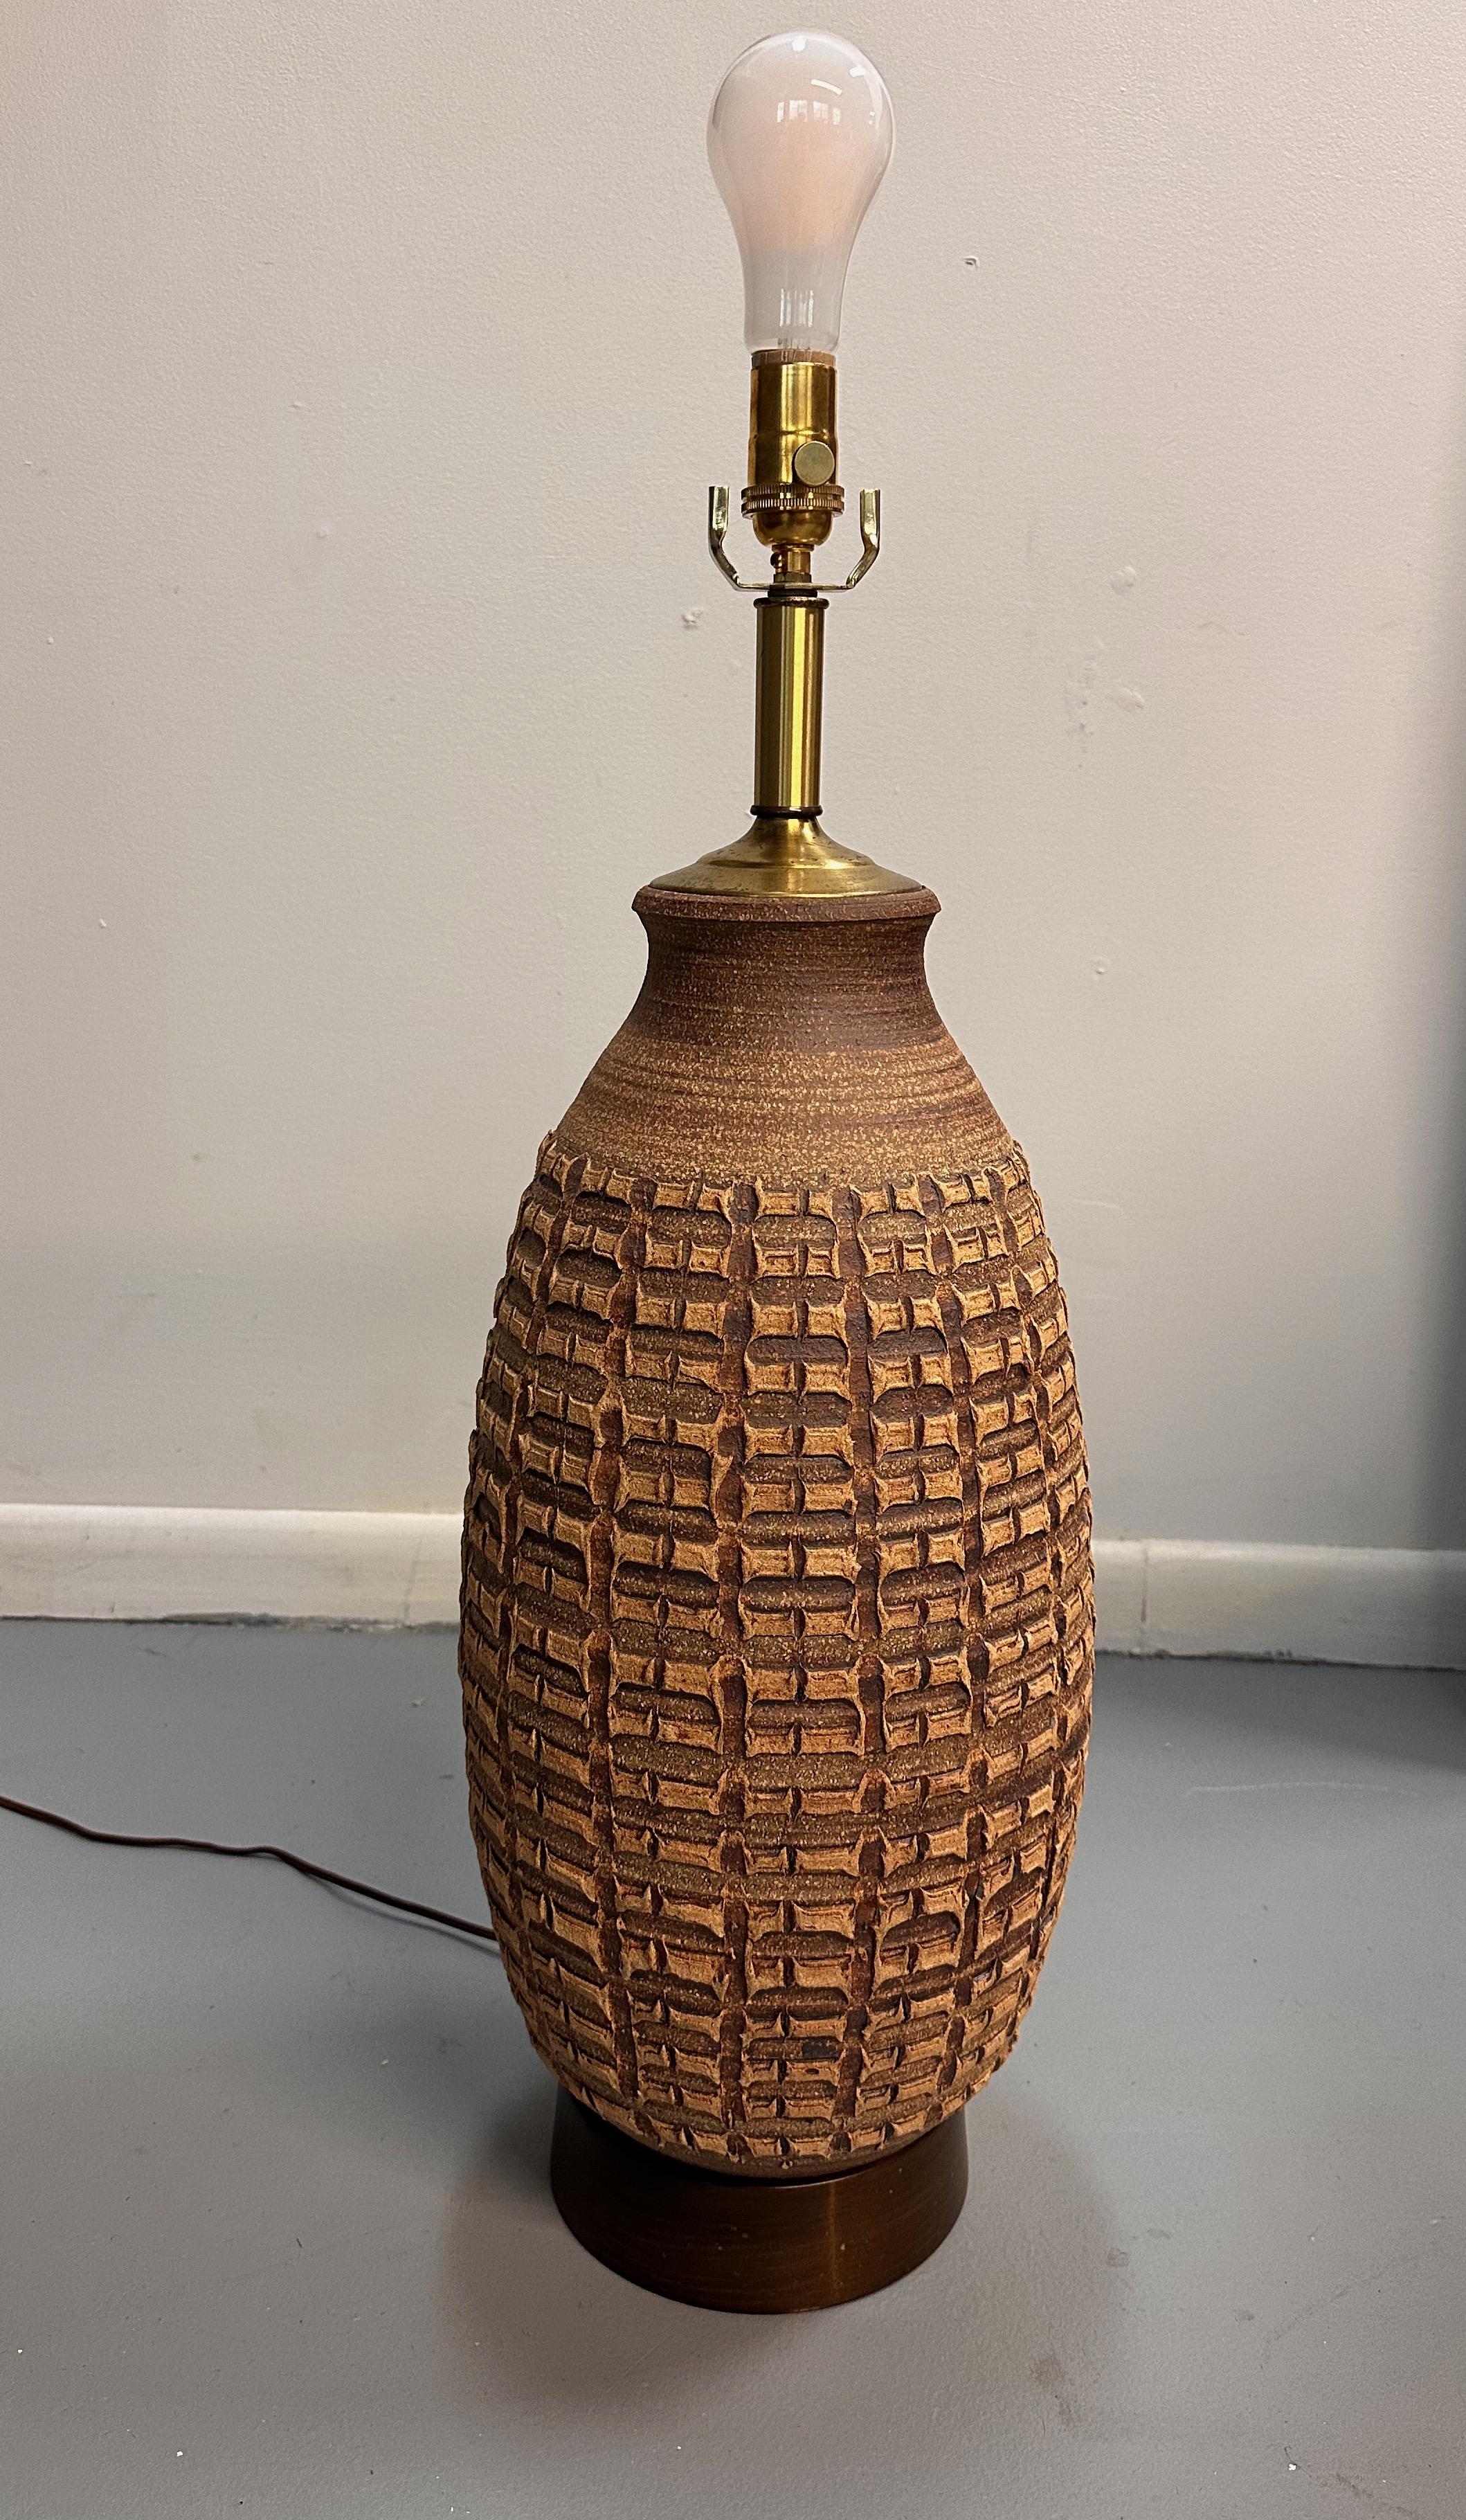 Ceramic table lamp by Bob Kinzie. Wheel thrown pottery with decorated pattern on walnut base.